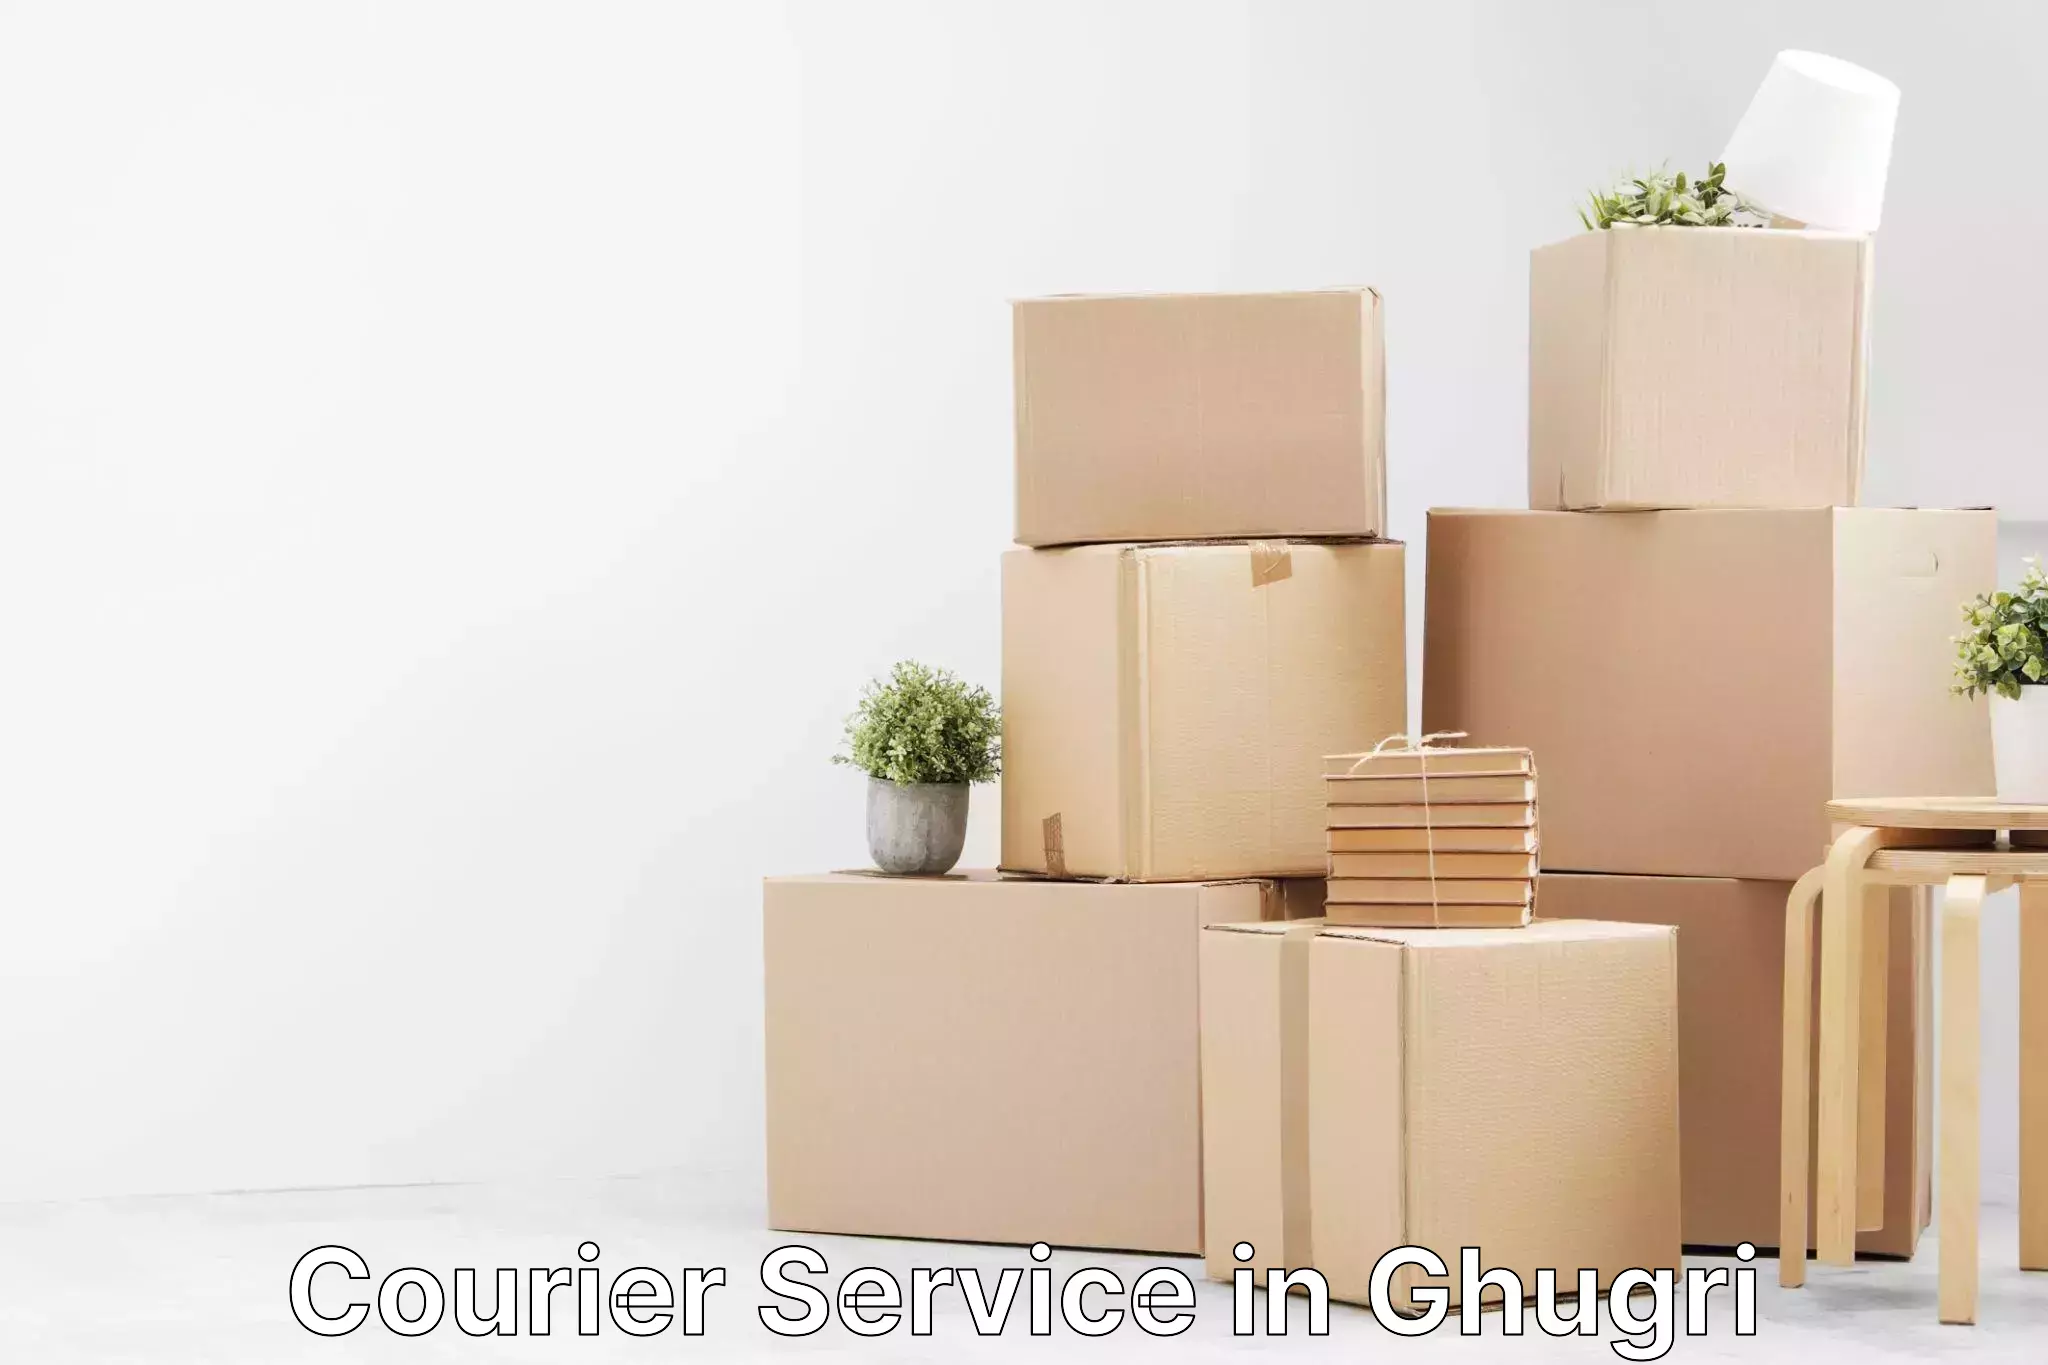 Parcel handling and care in Ghugri